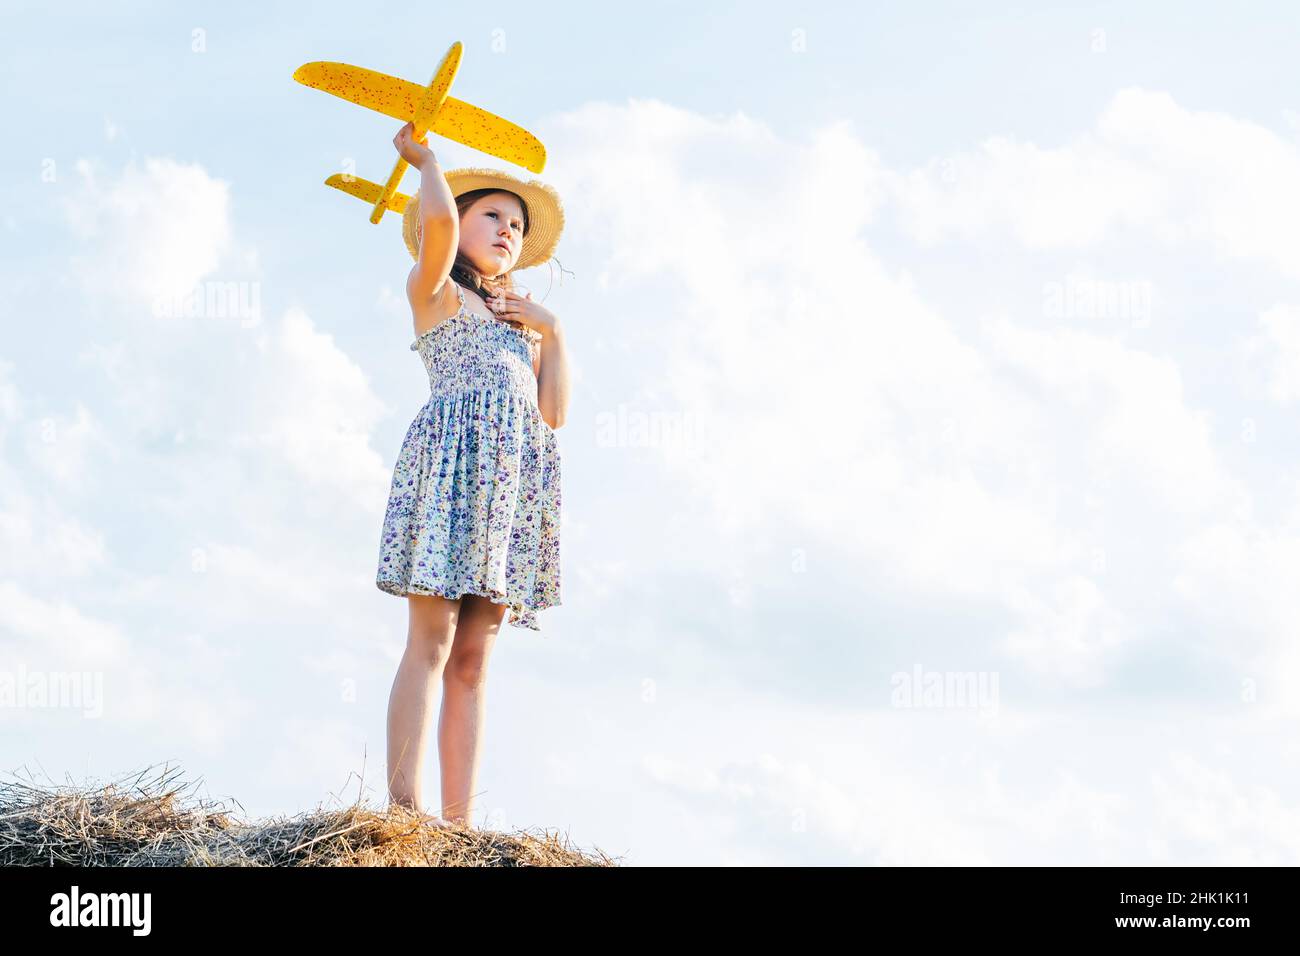 Portrait of little girl in hat and dress playing flying yellow toy airplane, standing on haystack. Taking aim in sky. Light sunny day. Having adventur Stock Photo